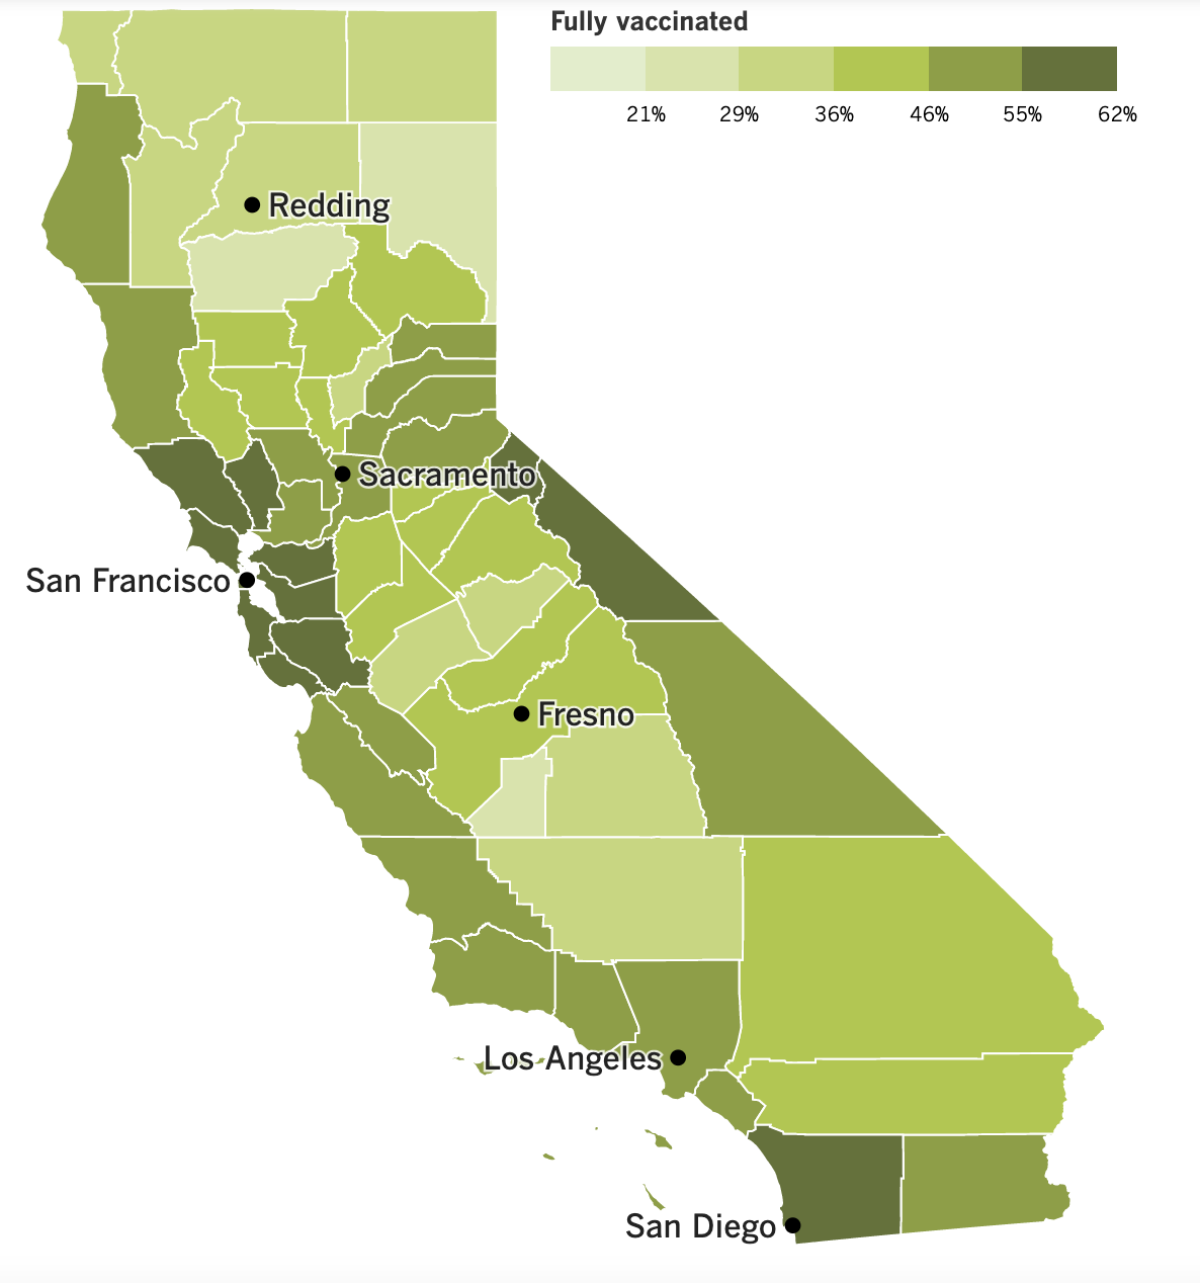 A map of California showing vaccinate rate by county.